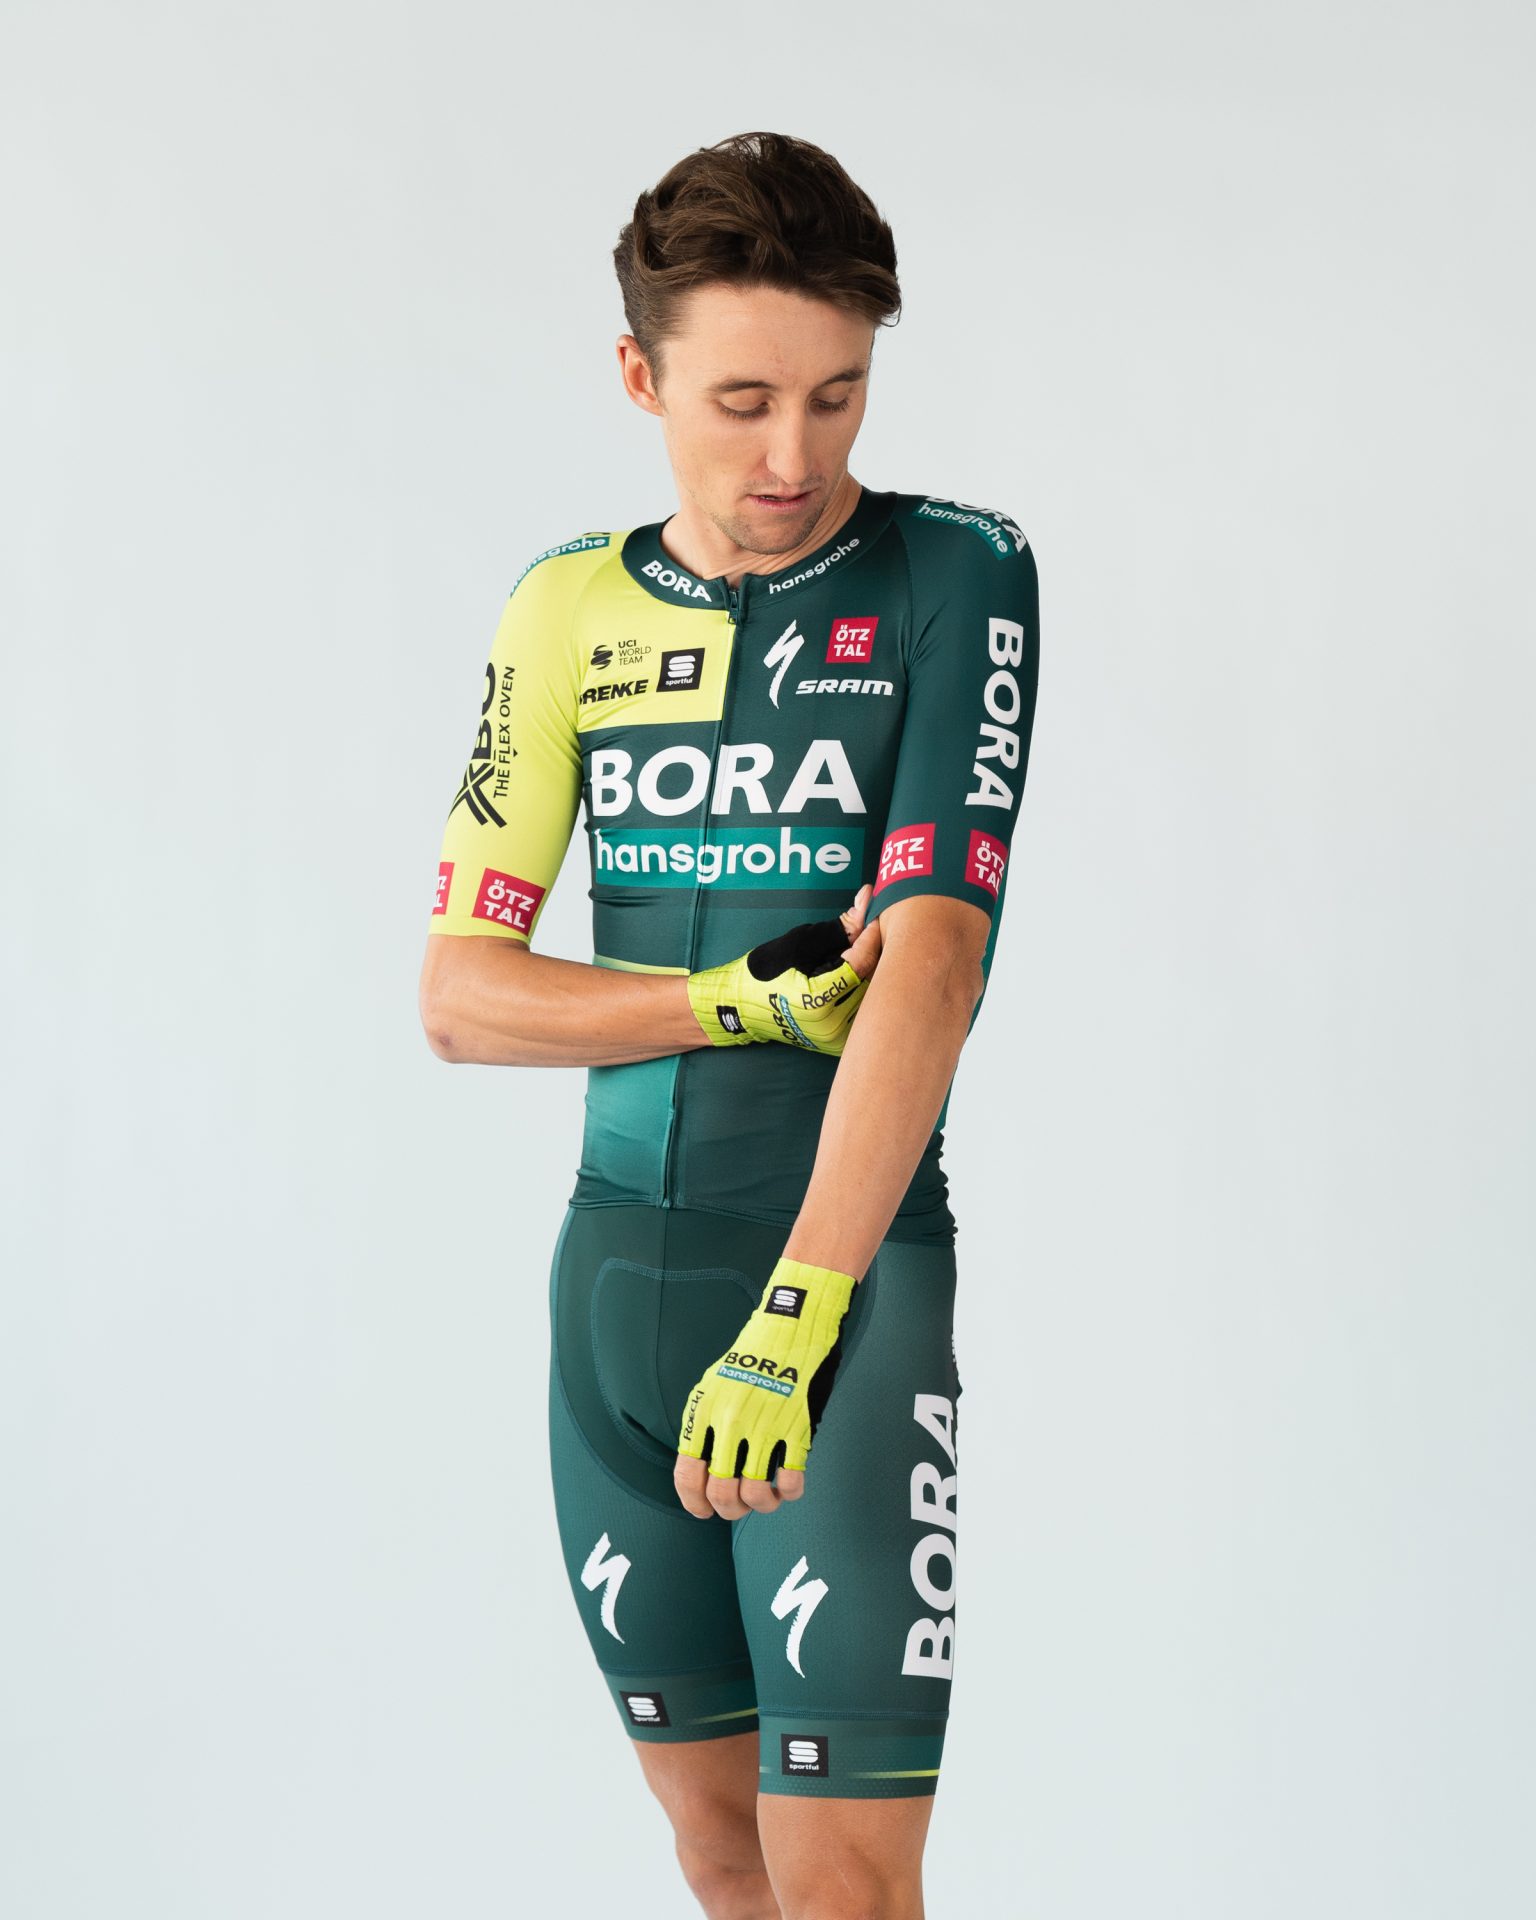 Jai Hindley models the new Bora-Hansgrohe team kit for 2024. It's mostly forest green, with bright blocks of lime on the right shoulder and gloves. Jai is looking down as he adjusts a sleeve, with a neutral expression on his face.